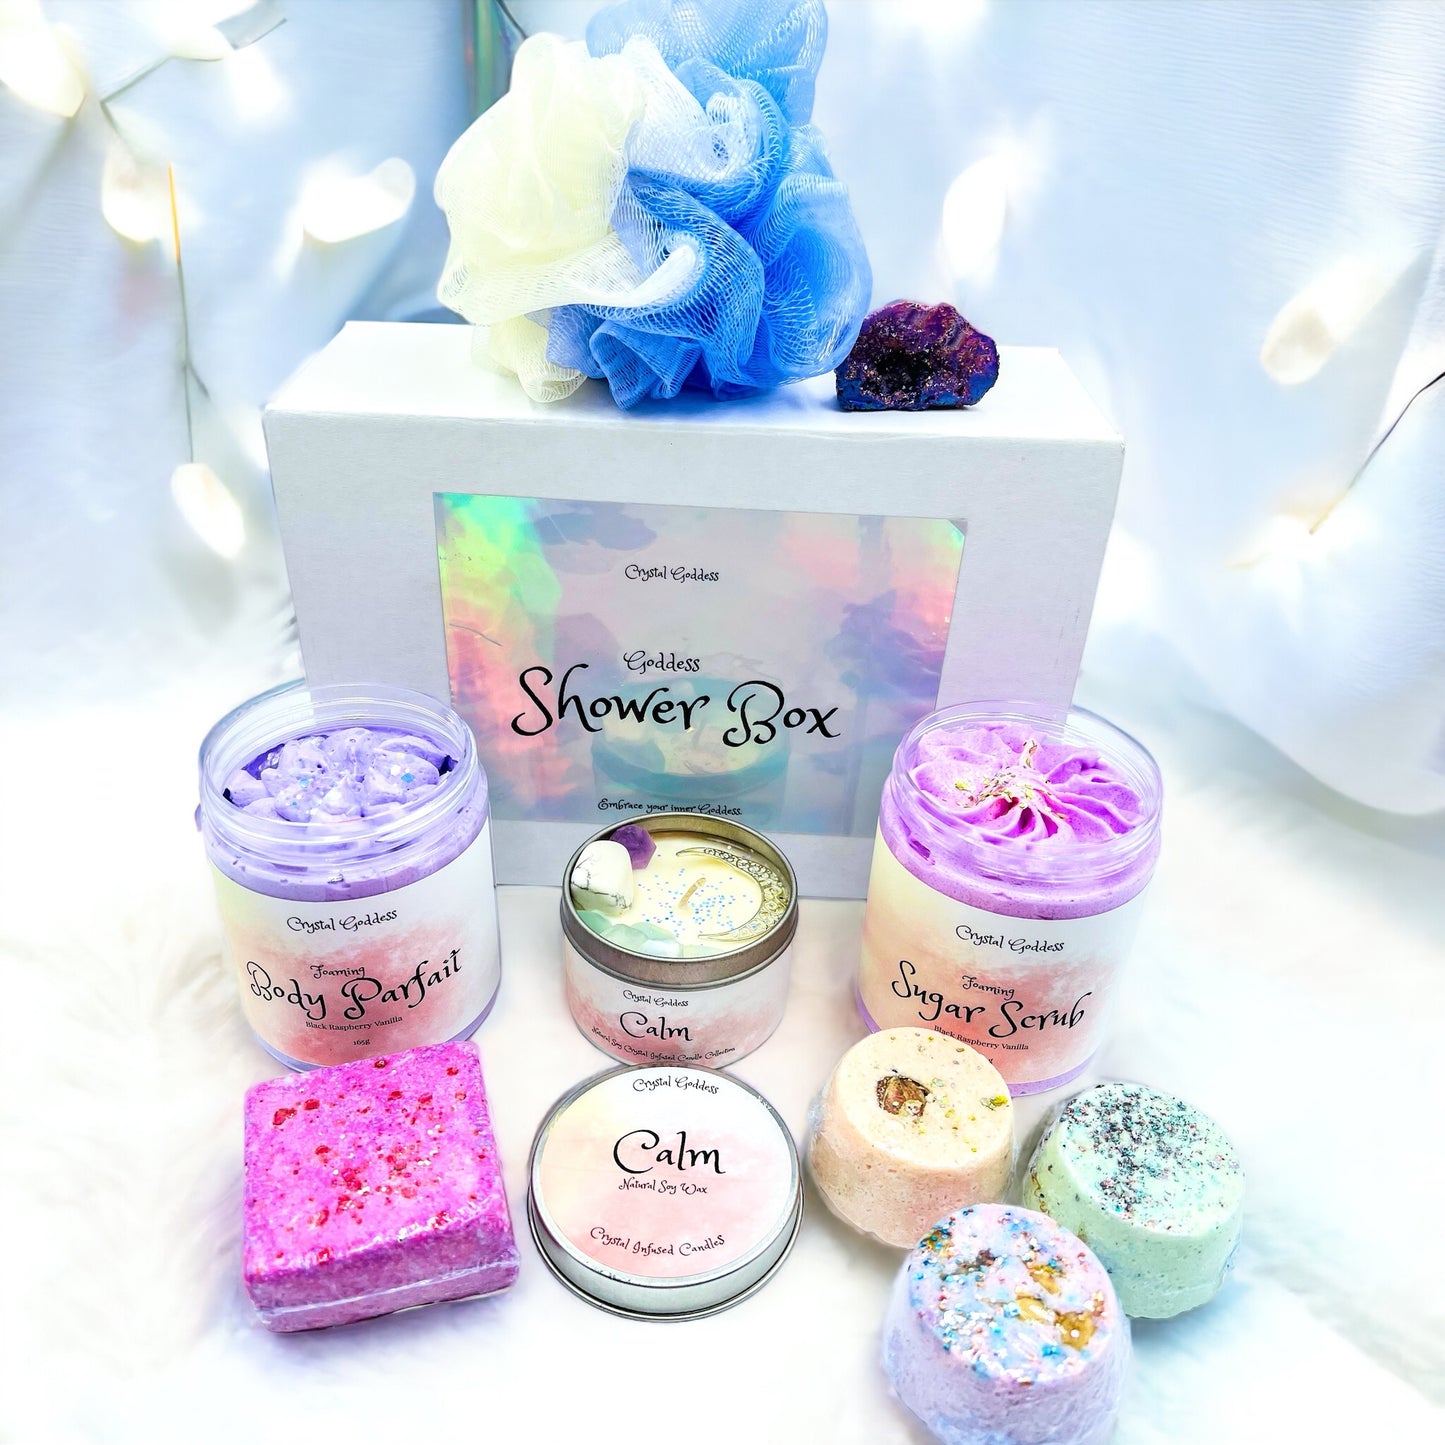 Shower Gift Box With Calm Affirmation Candle